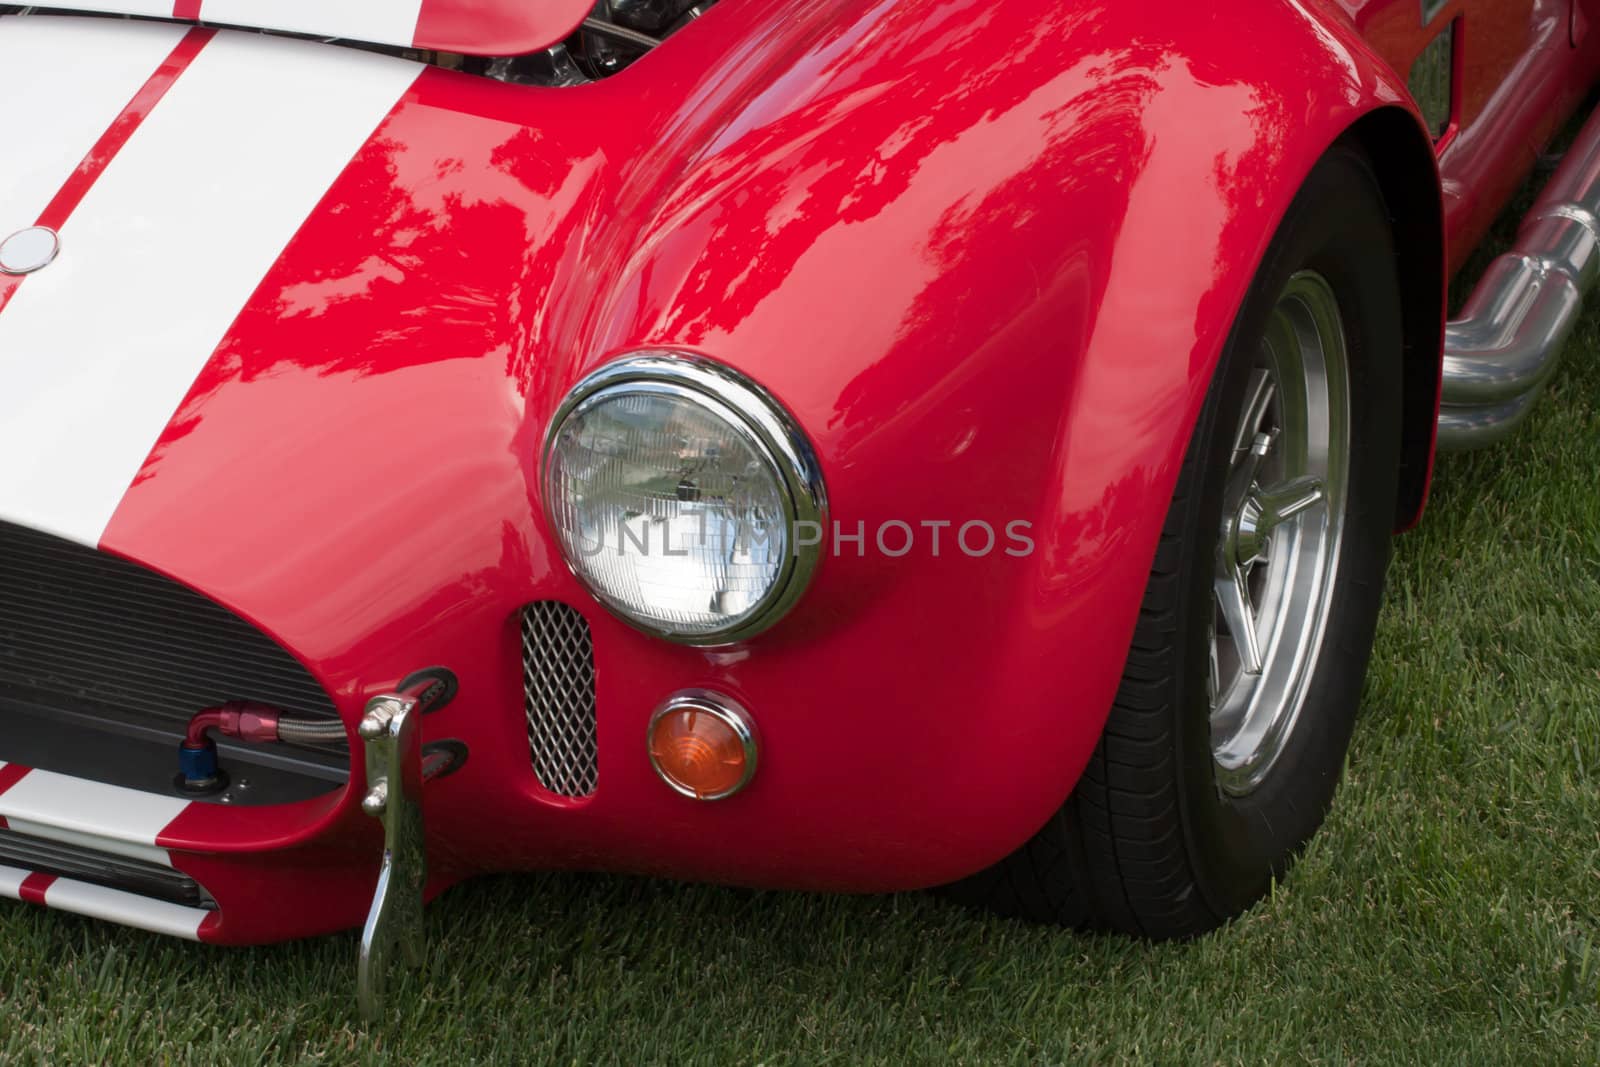 front of a classic car with headlight and fender